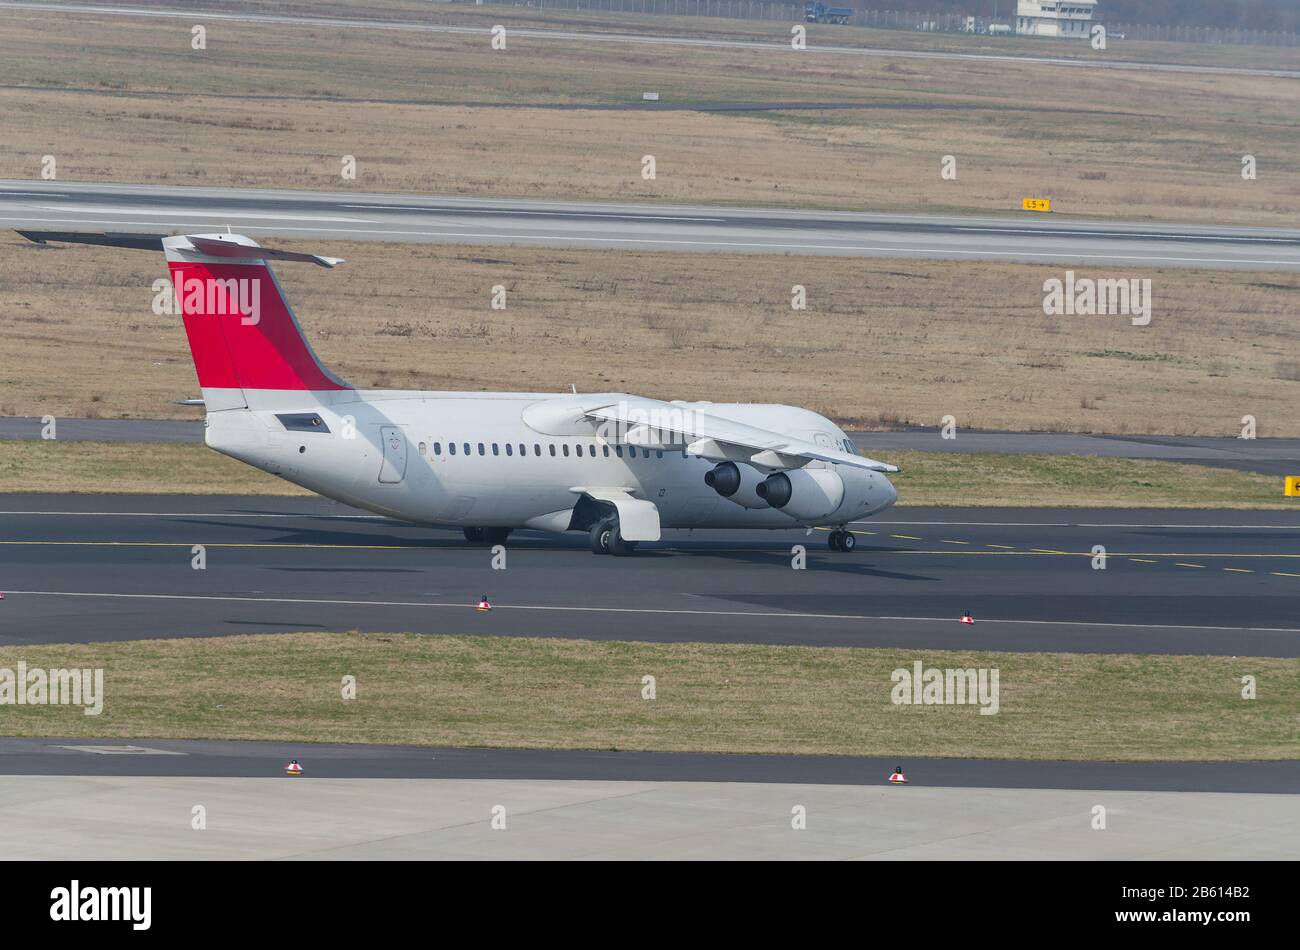 Dusseldorf, Nrw, Germany - March 18, 2015: A passenger plane on the runway of an airport start Stock Photo